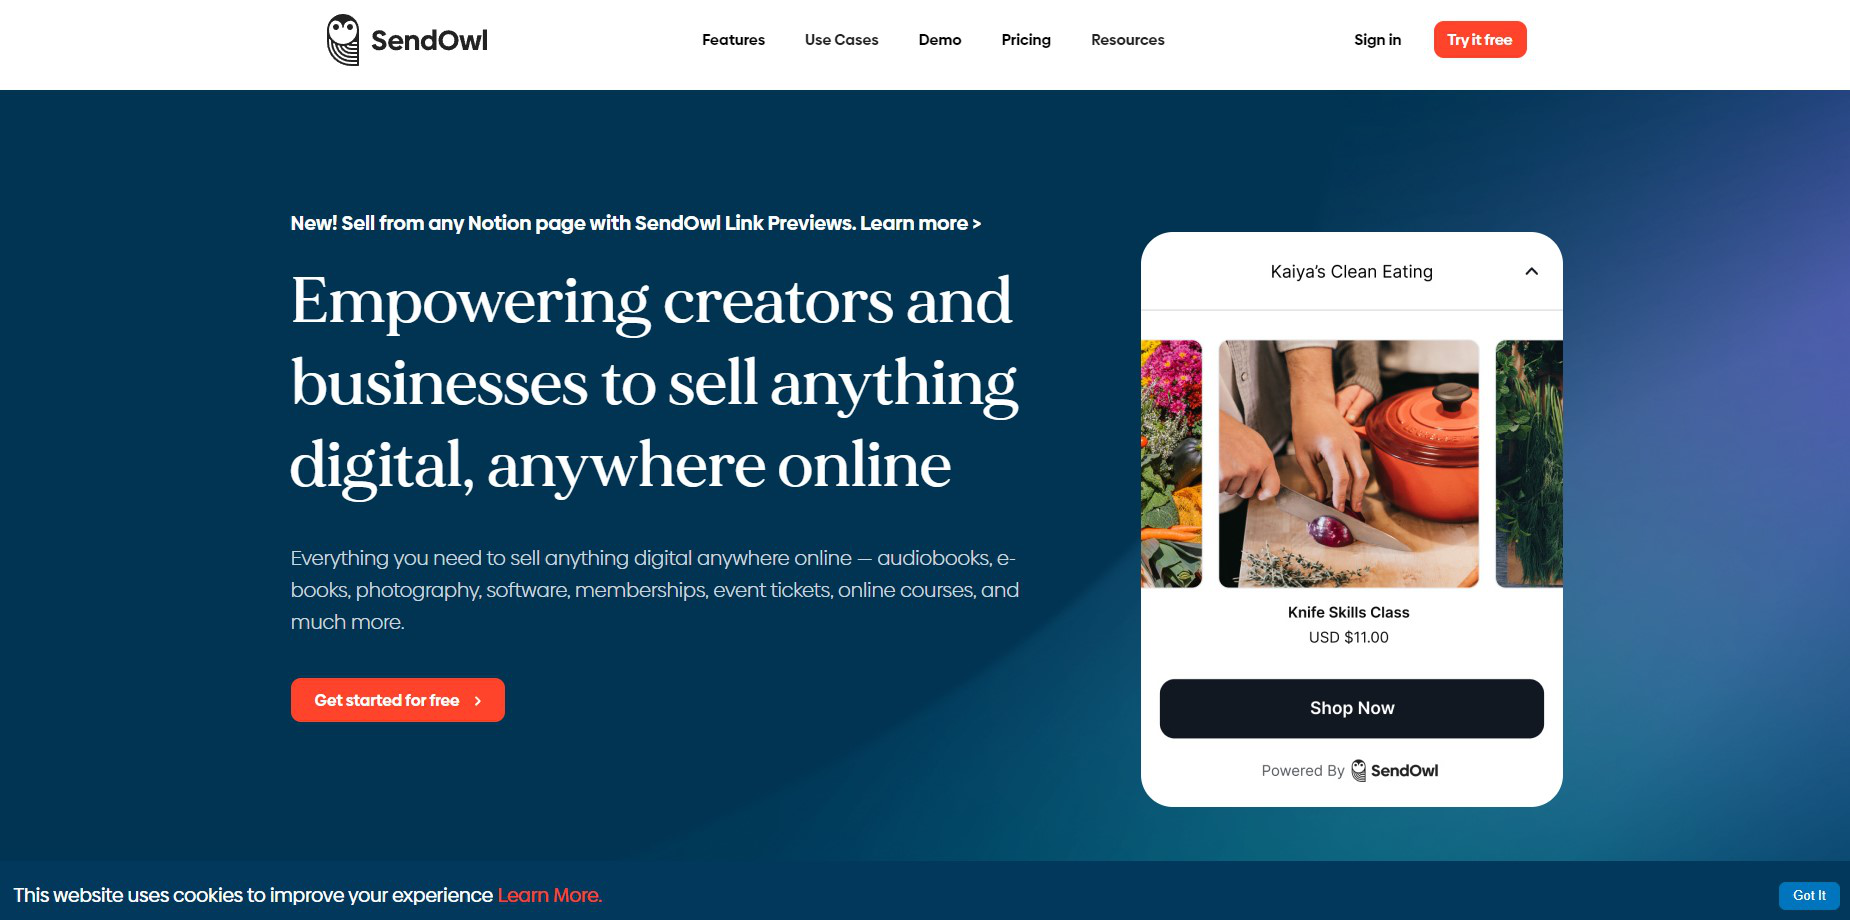 SendOwl is a jack of all trades platform with all the capabilities you need to sell, deliver, and market your digital products. 